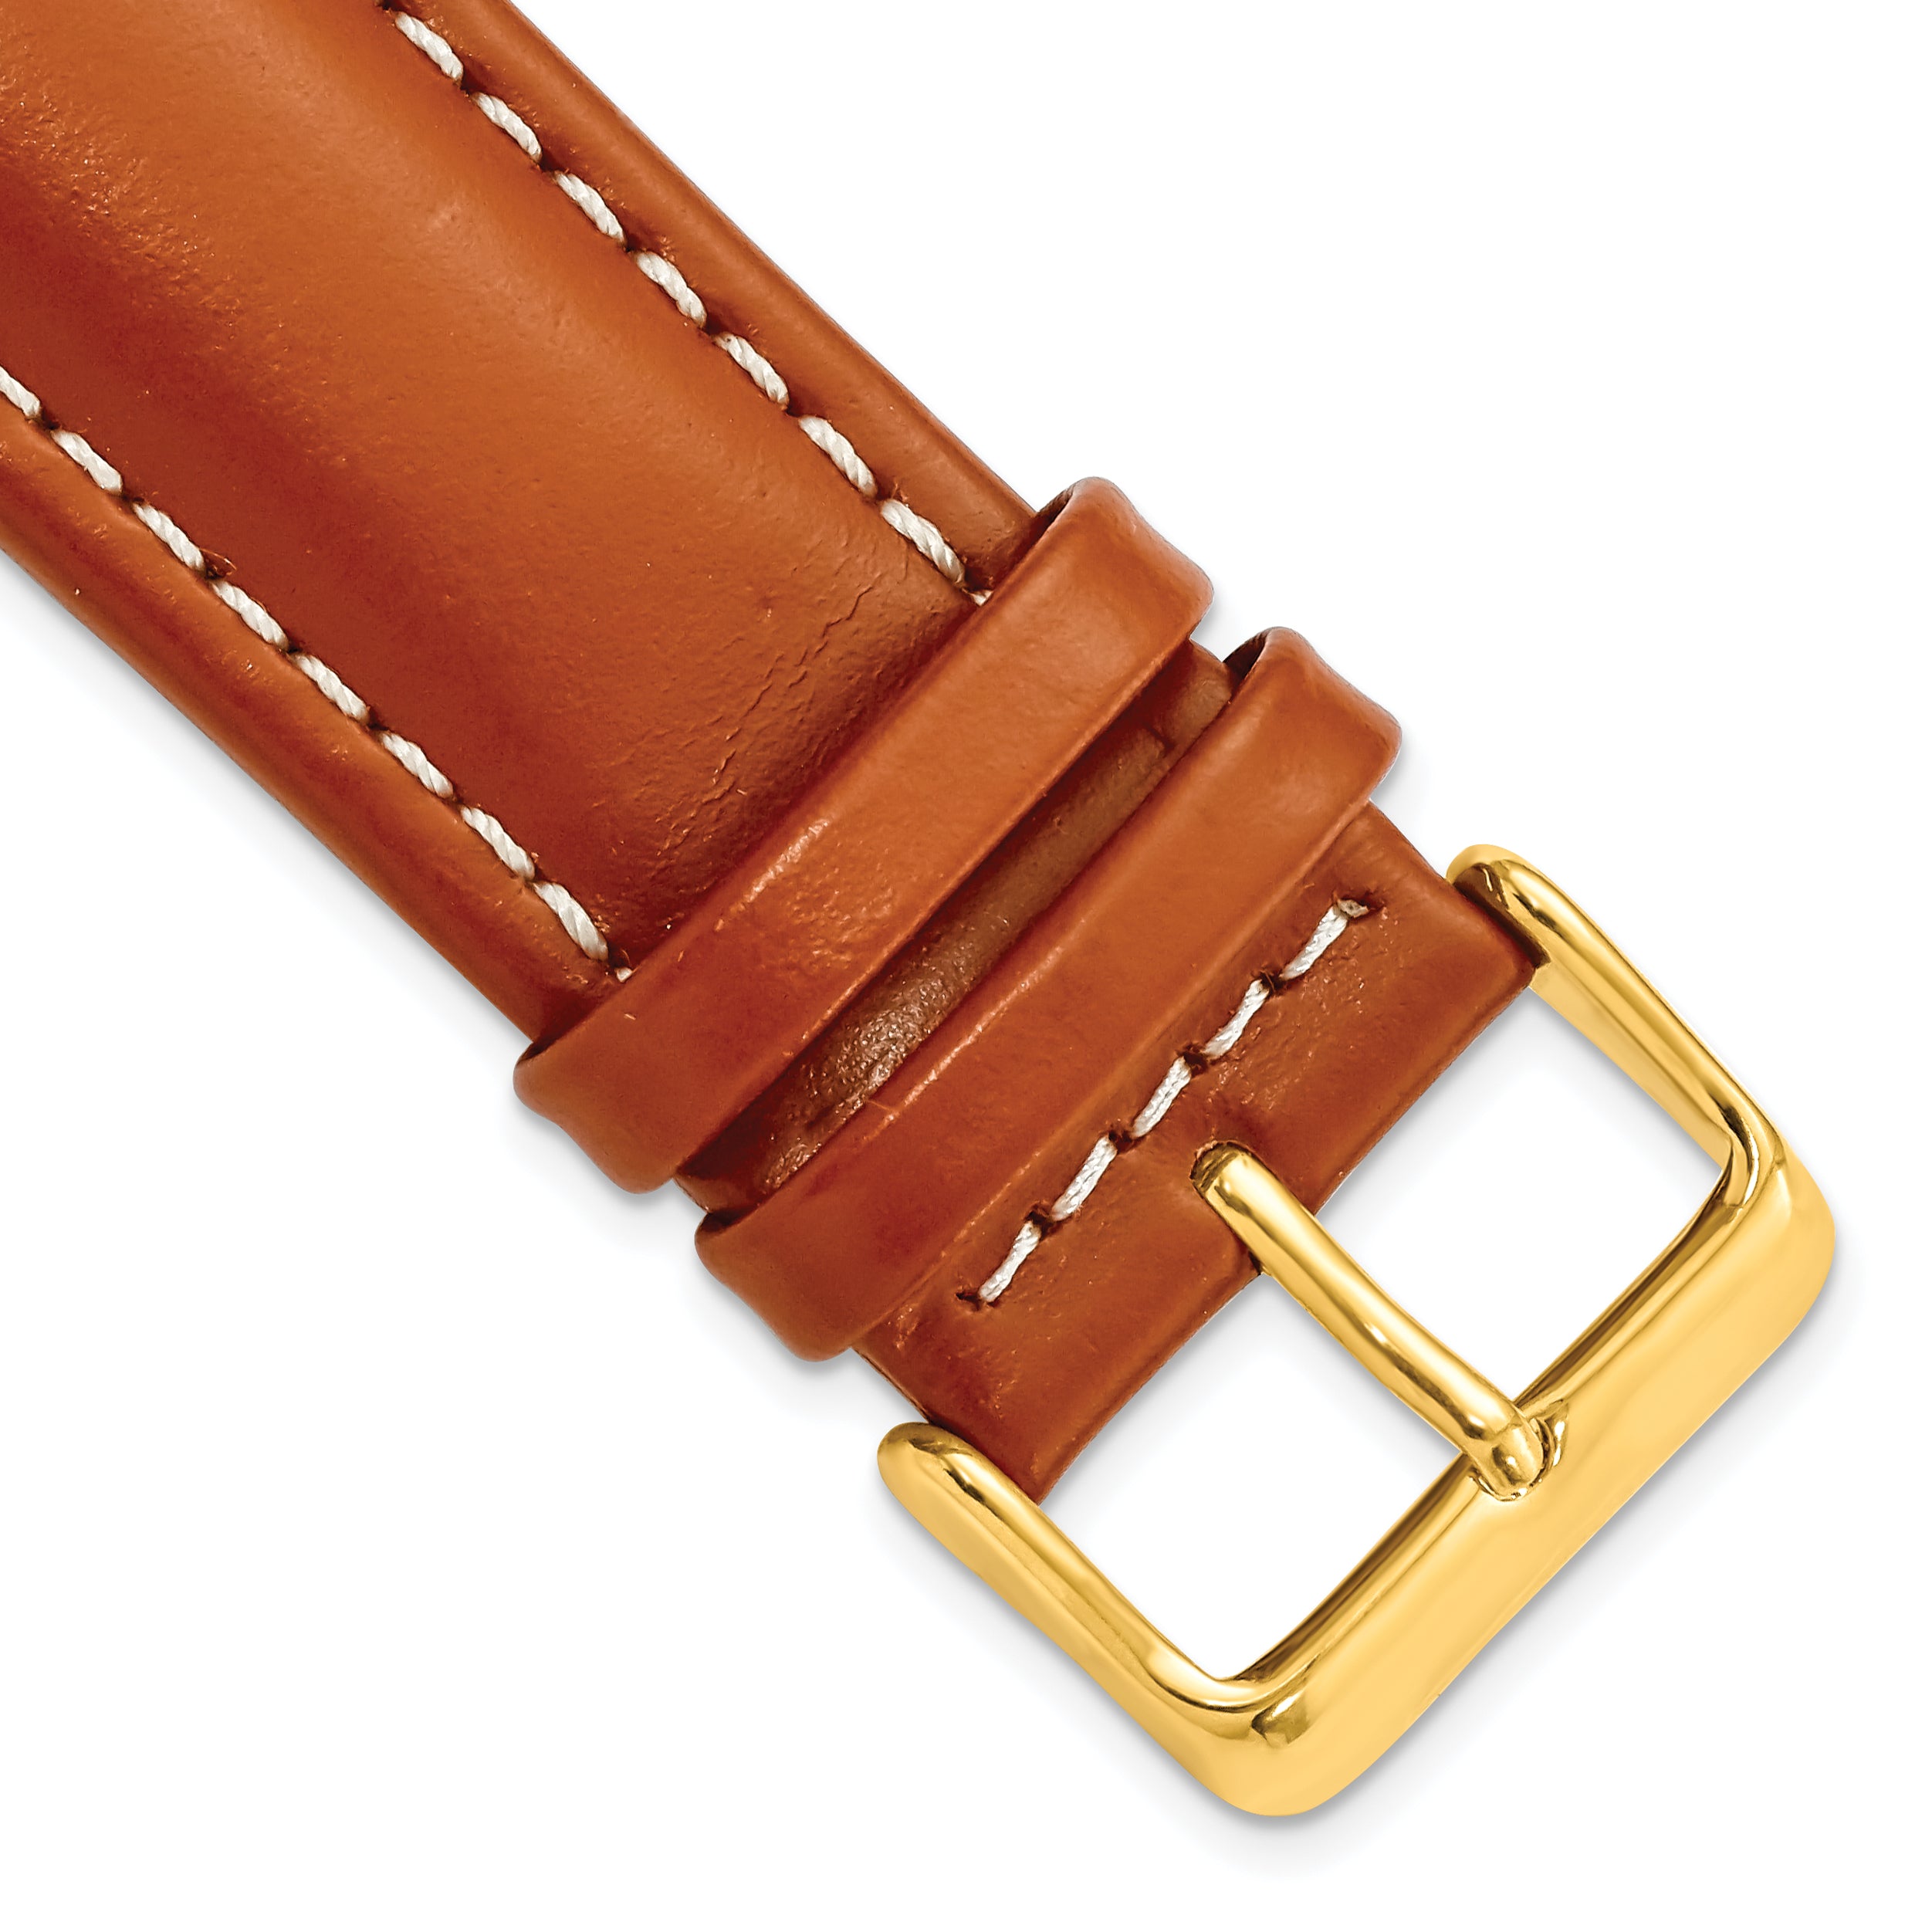 DeBeer 24mm Saddle Brown Oil-tanned Leather with White Stitching and Gold-tone Buckle 7.5 inch Watch Band